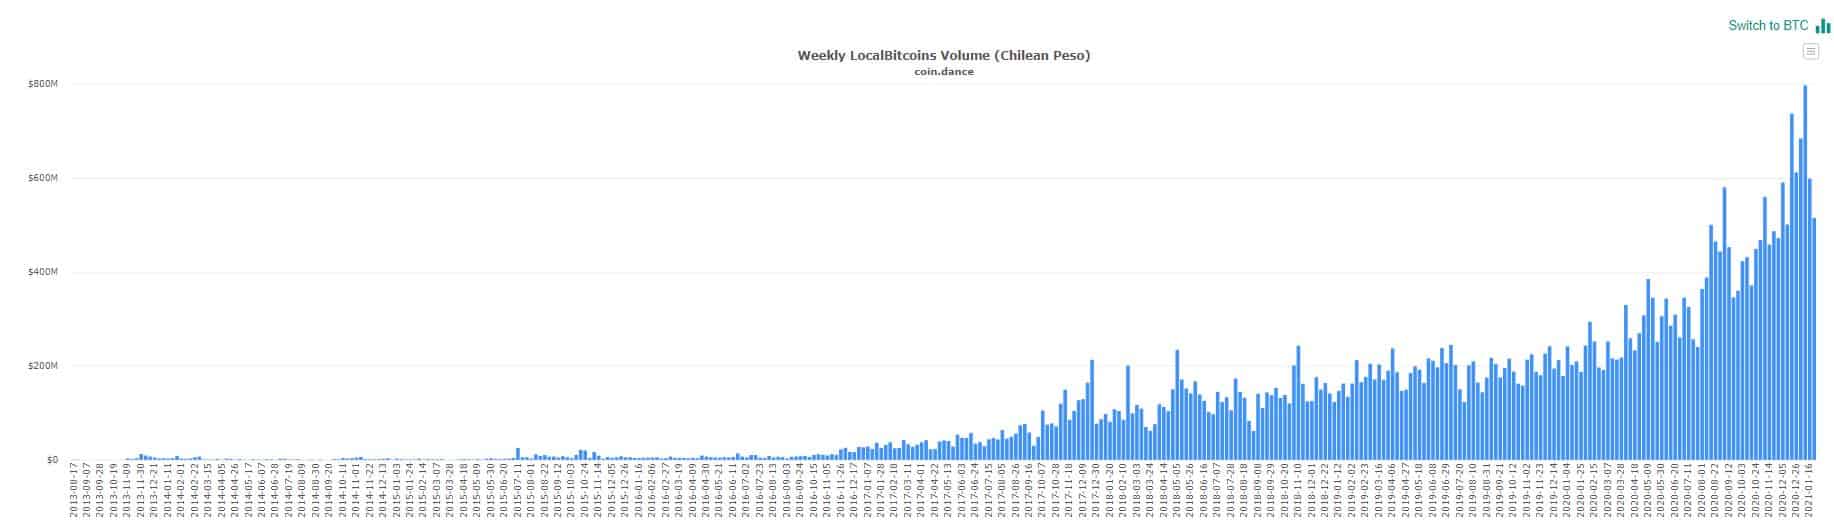 Bitcoin P2P Trading Volume On LocalBitcoins In Chile. Source: CoinDance